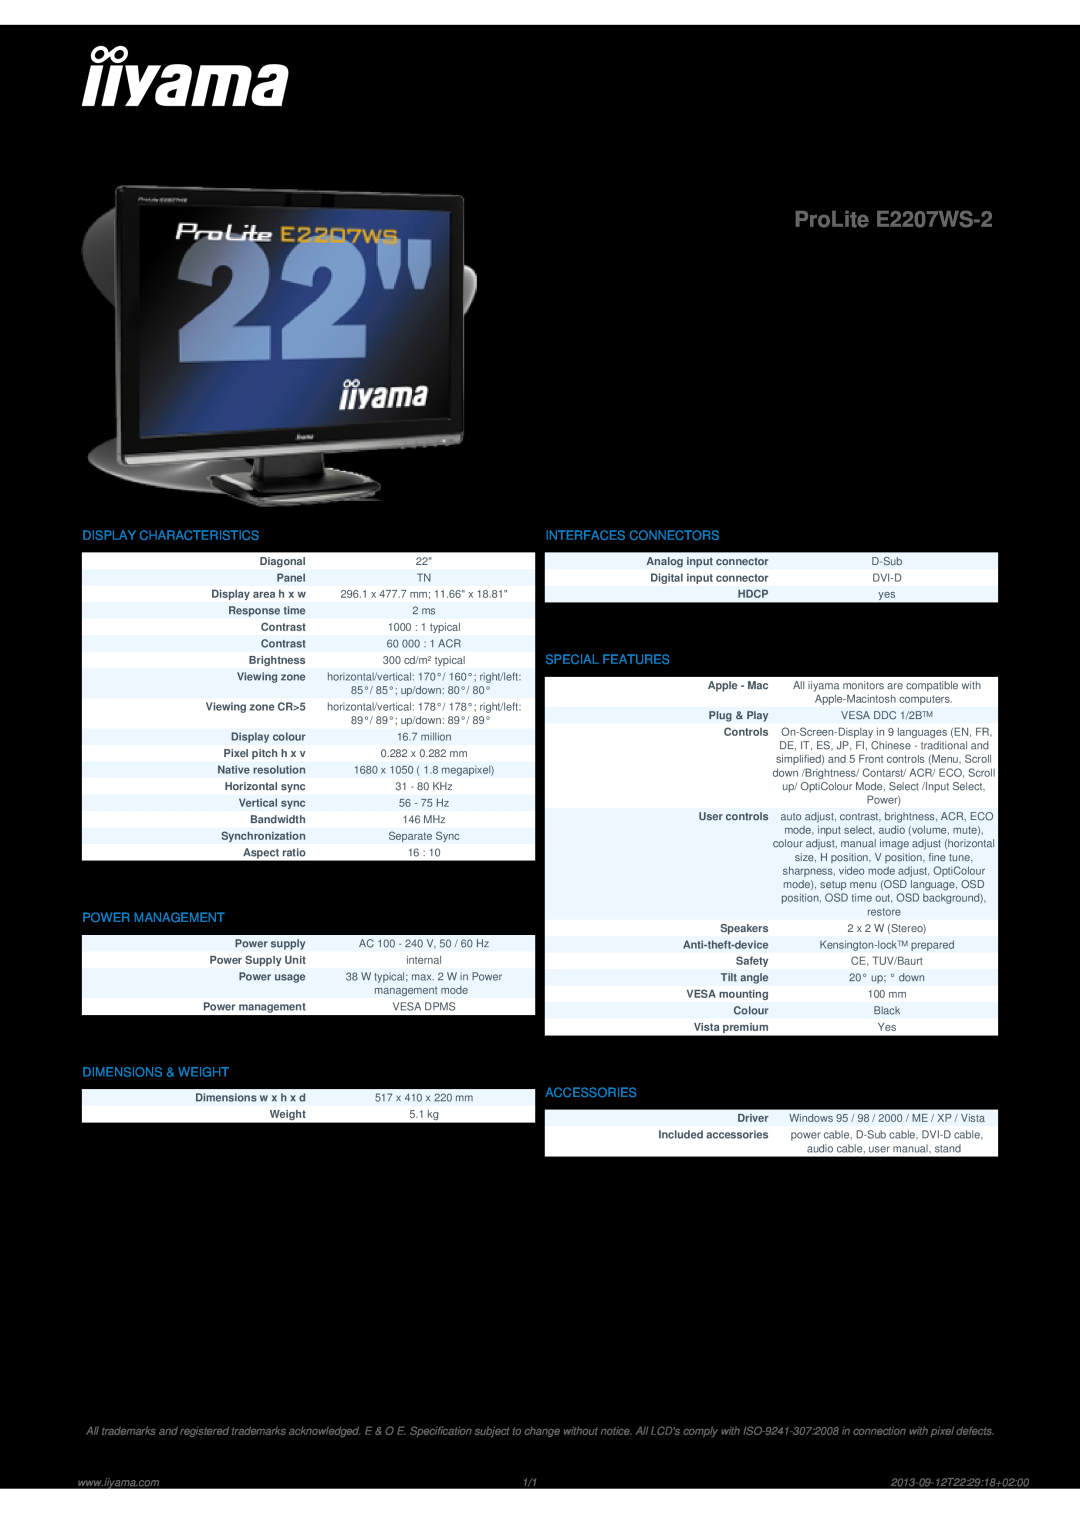 Iiyama dimensions ProLite E2207WS-2, Display Characteristics, Power Management, Interfaces Connectors, Special Features 